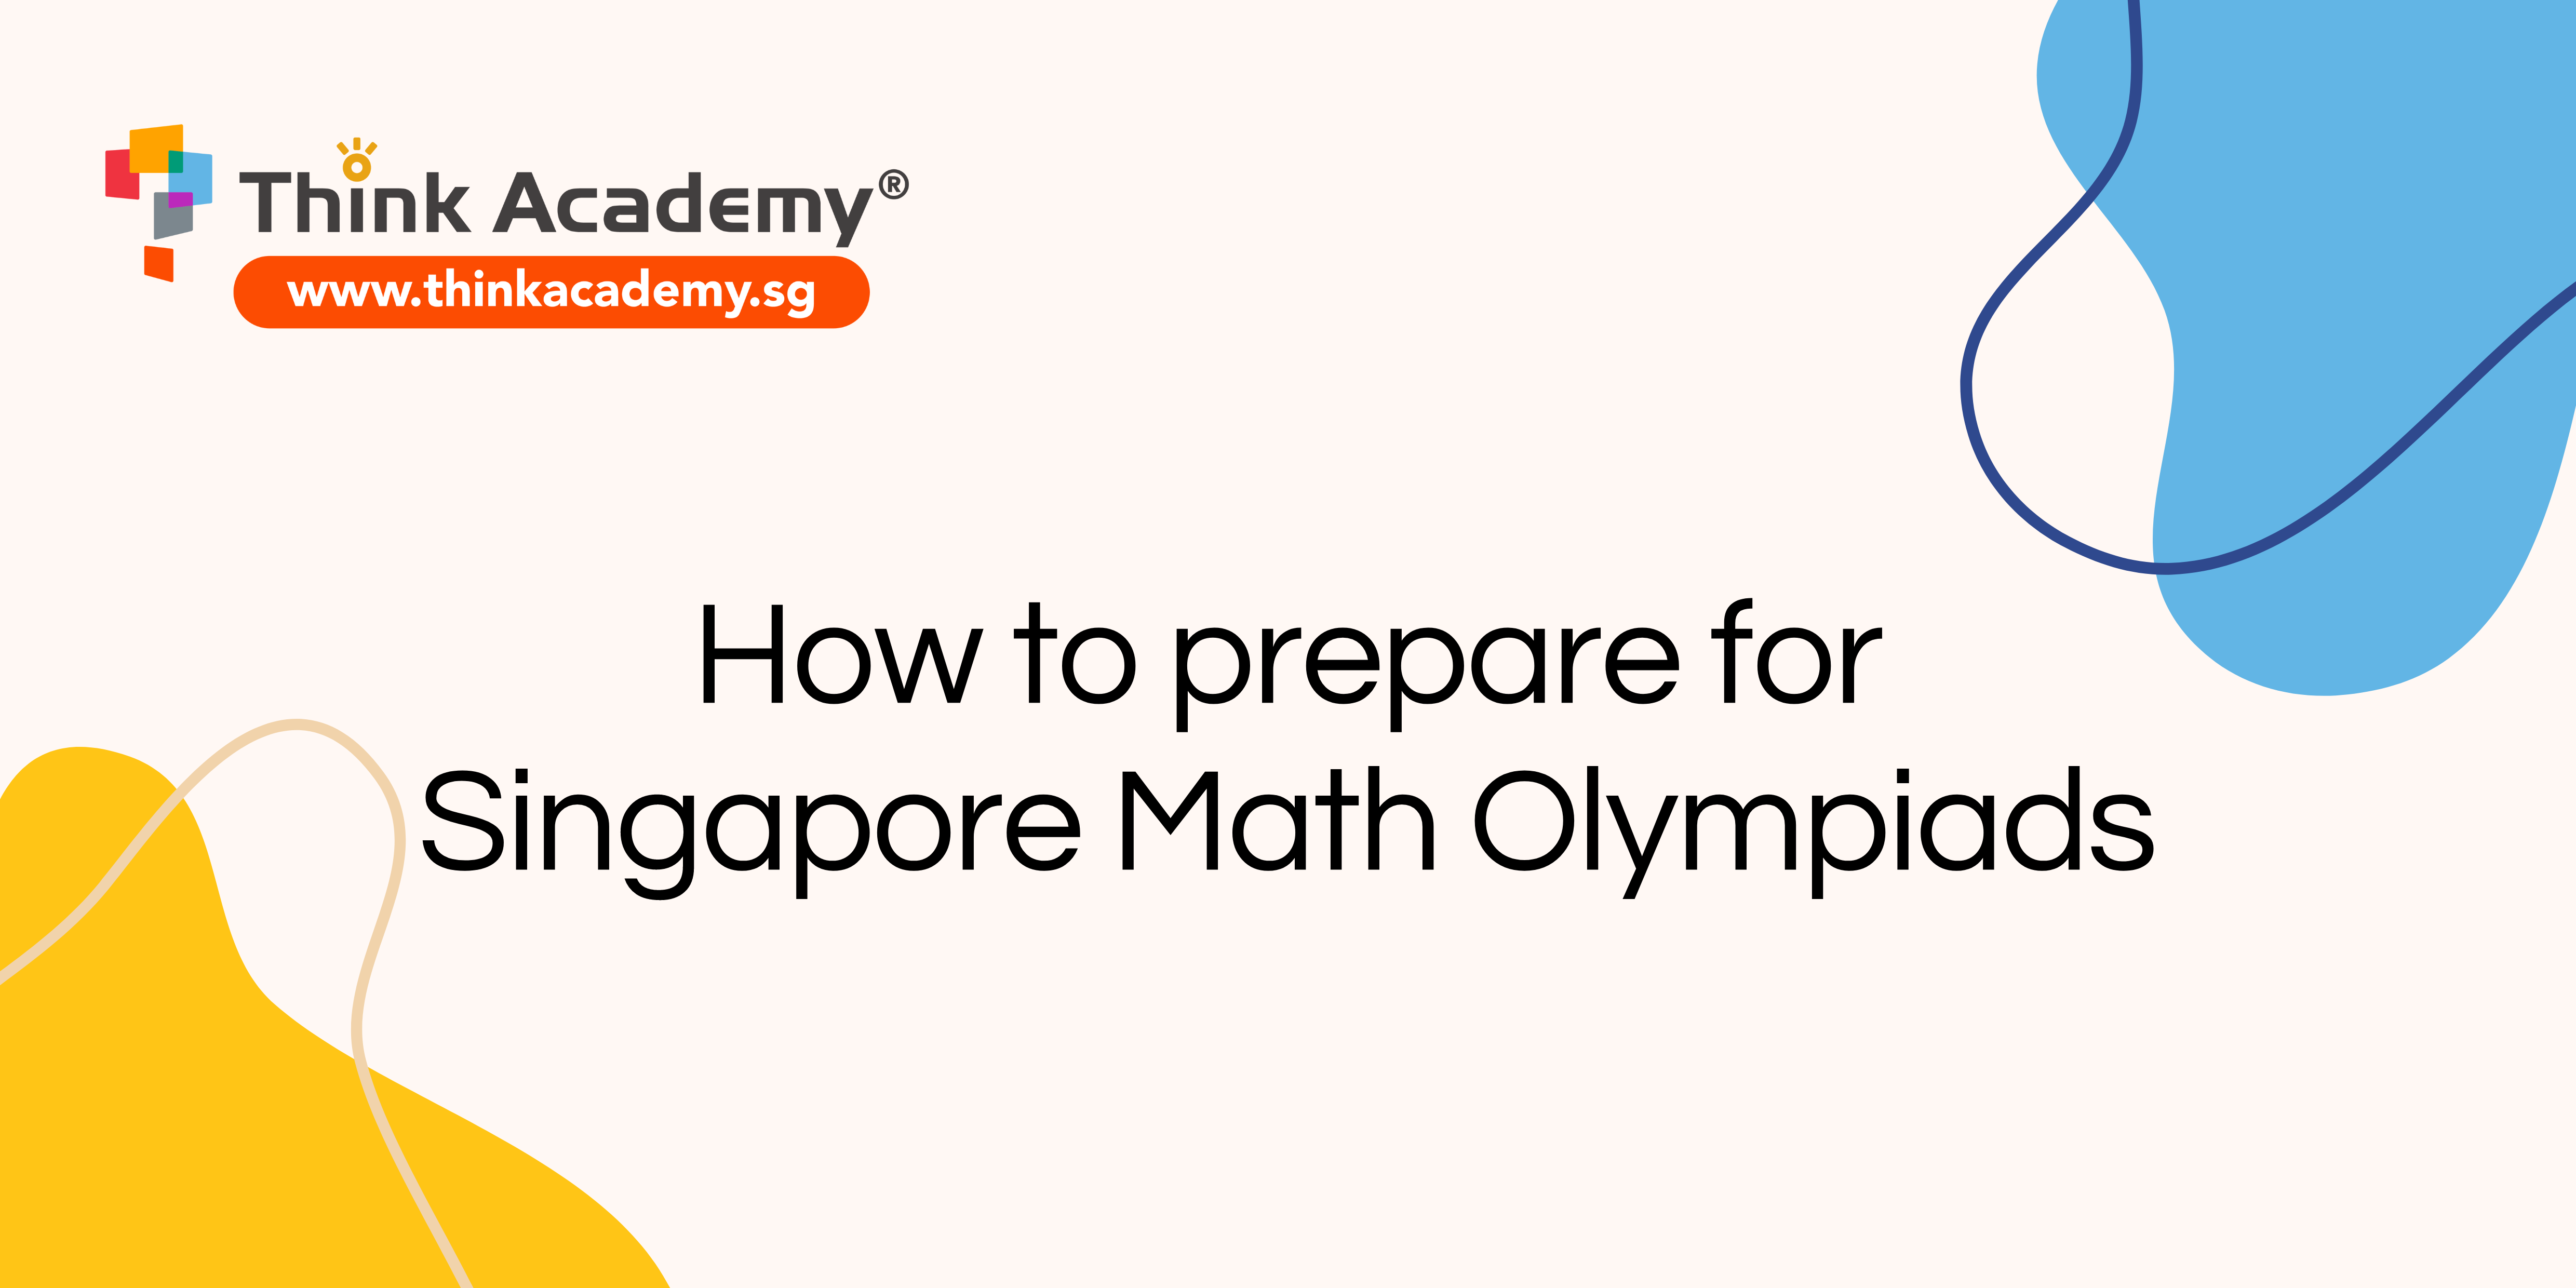 The best way to prepare for Singapore Math Olympiad